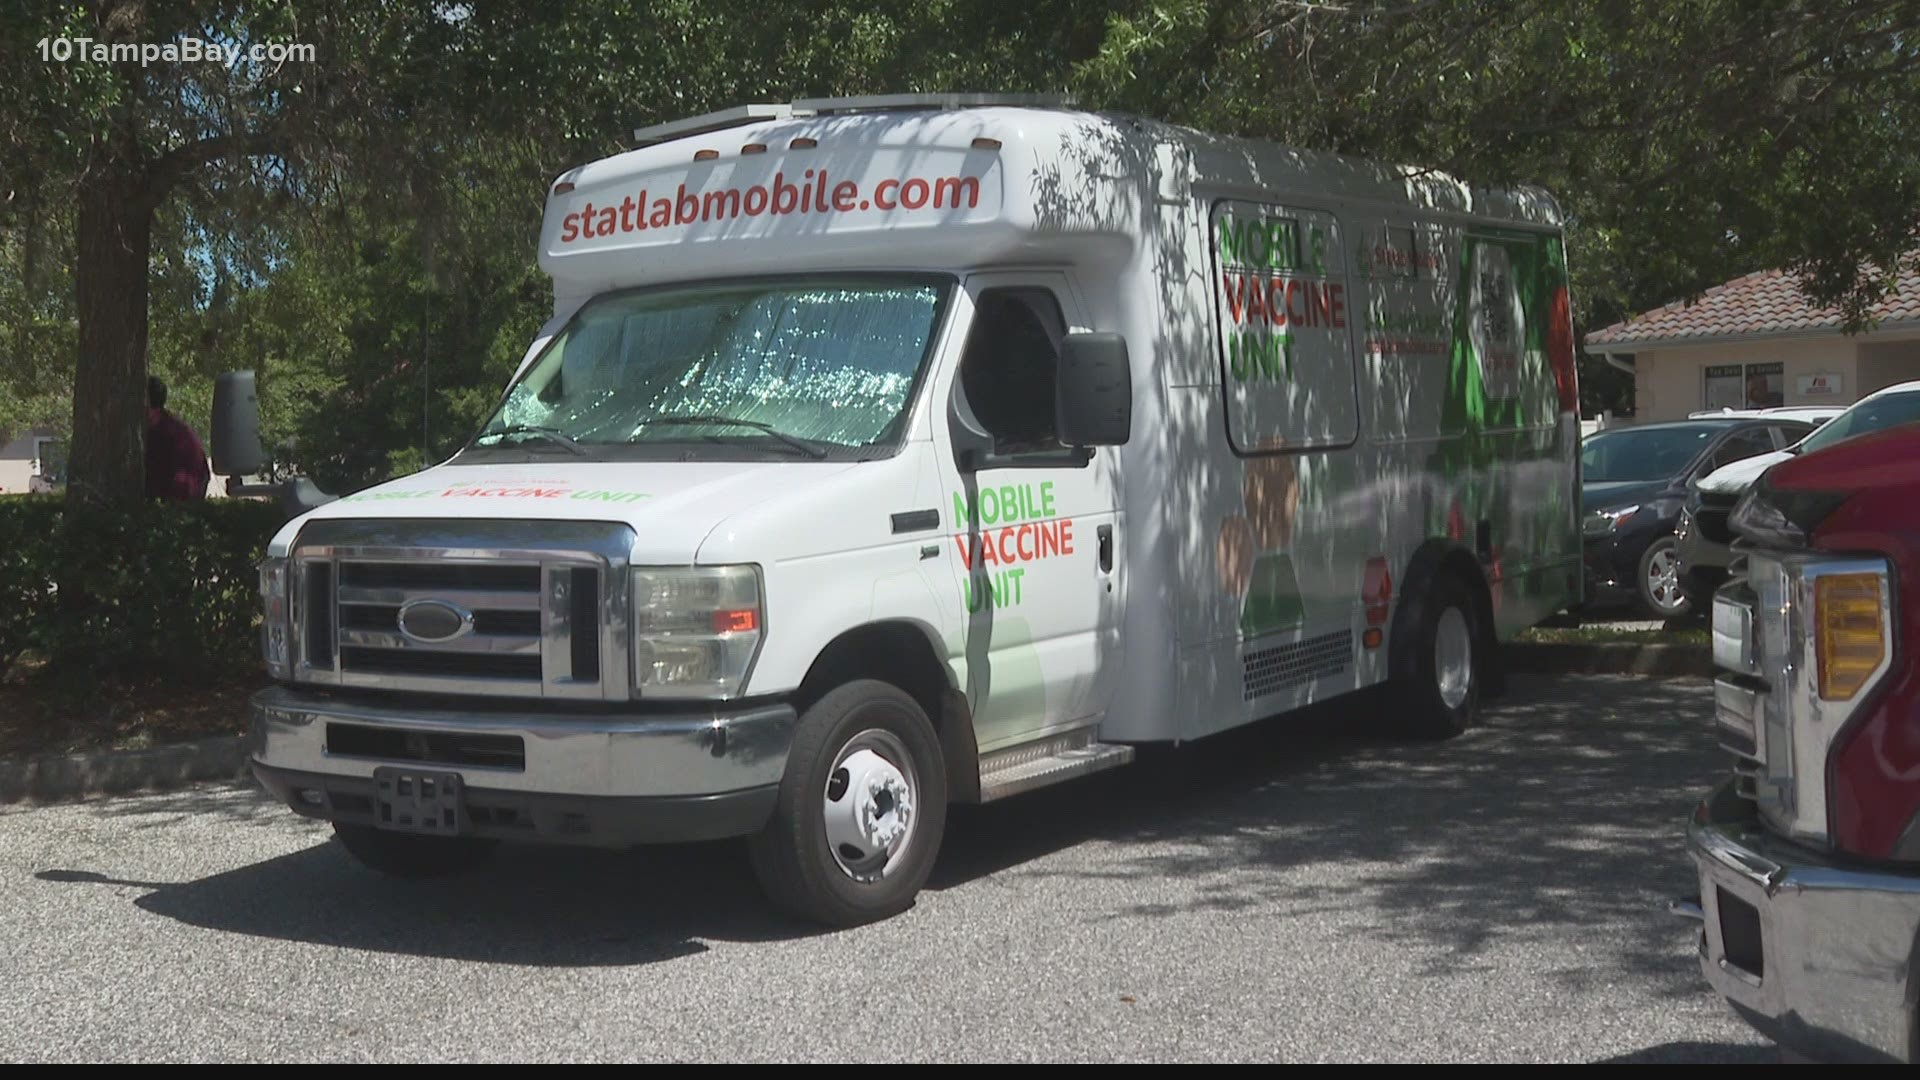 Statlab is bringing vaccines to communities that need them with its vaccination van.